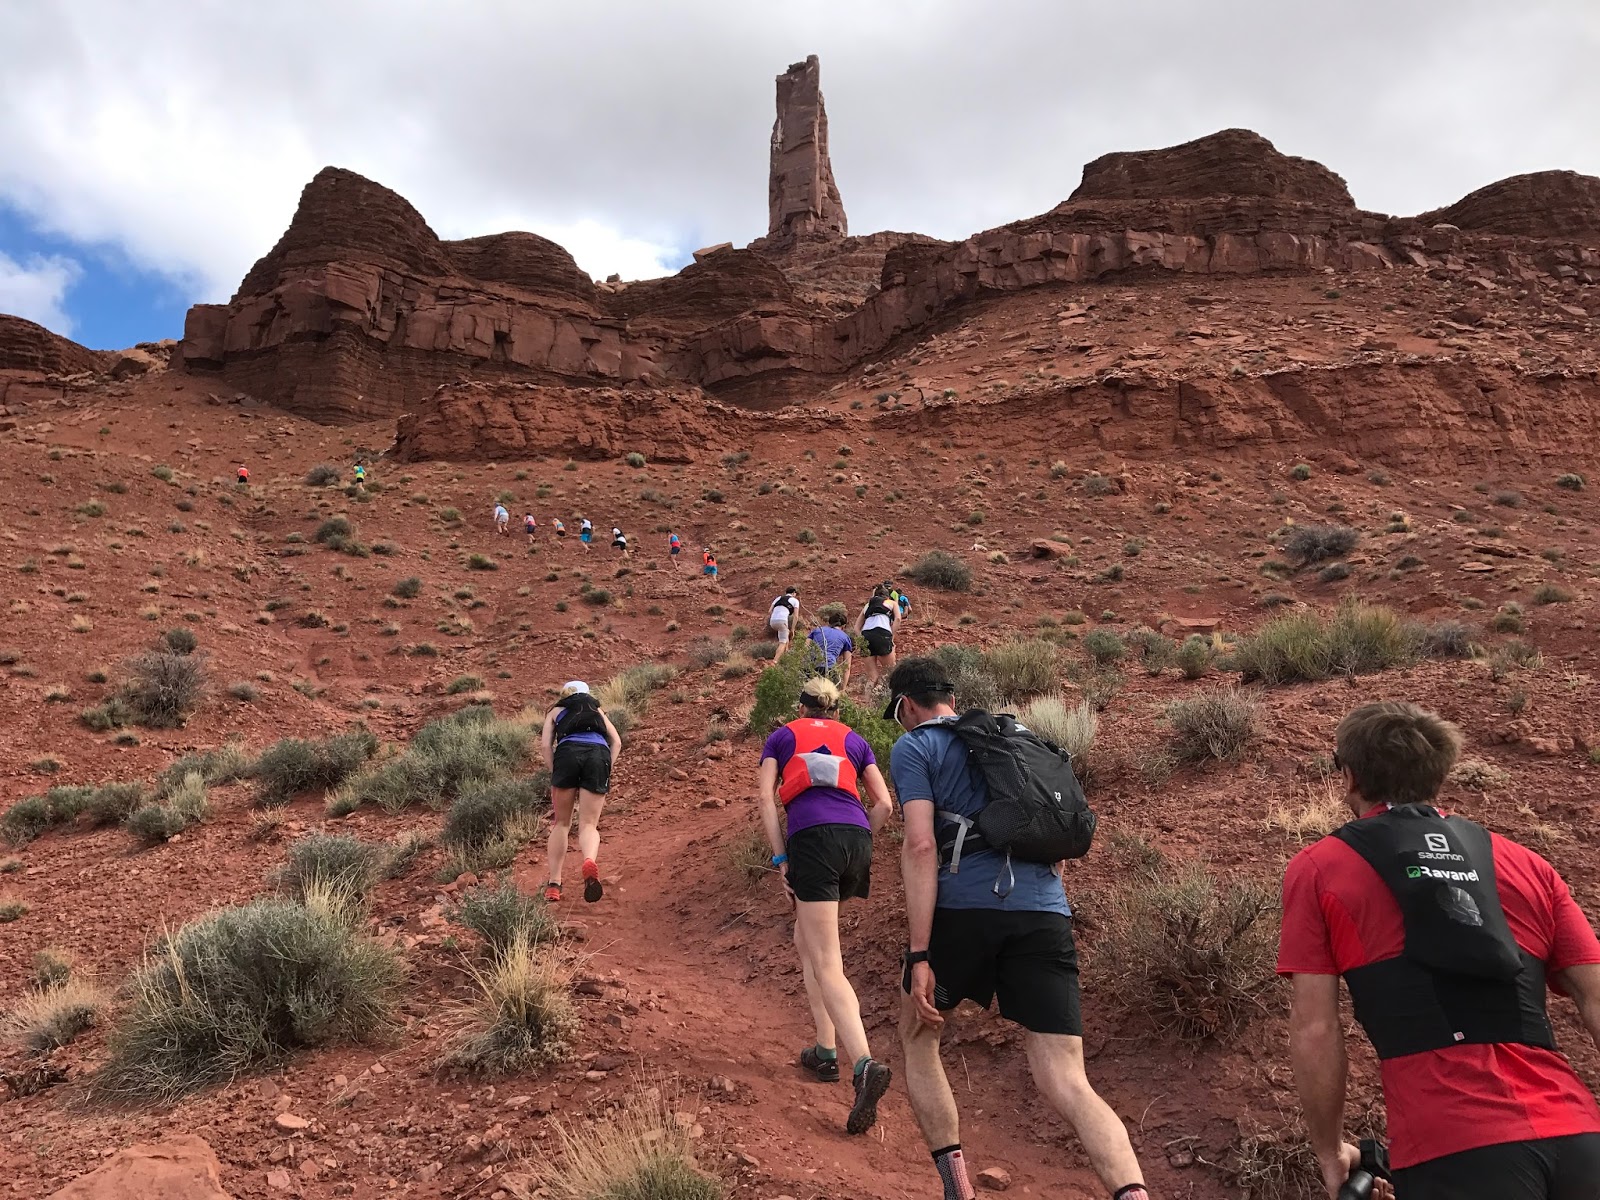 Road Trail Salomon Ultra Running Academy 2017 Moab: Summary, Pictures, Videos of Nutrition and Hydration & Uphill Technique- Max King and Anna Frost, Running with Poles-Greg Vollet